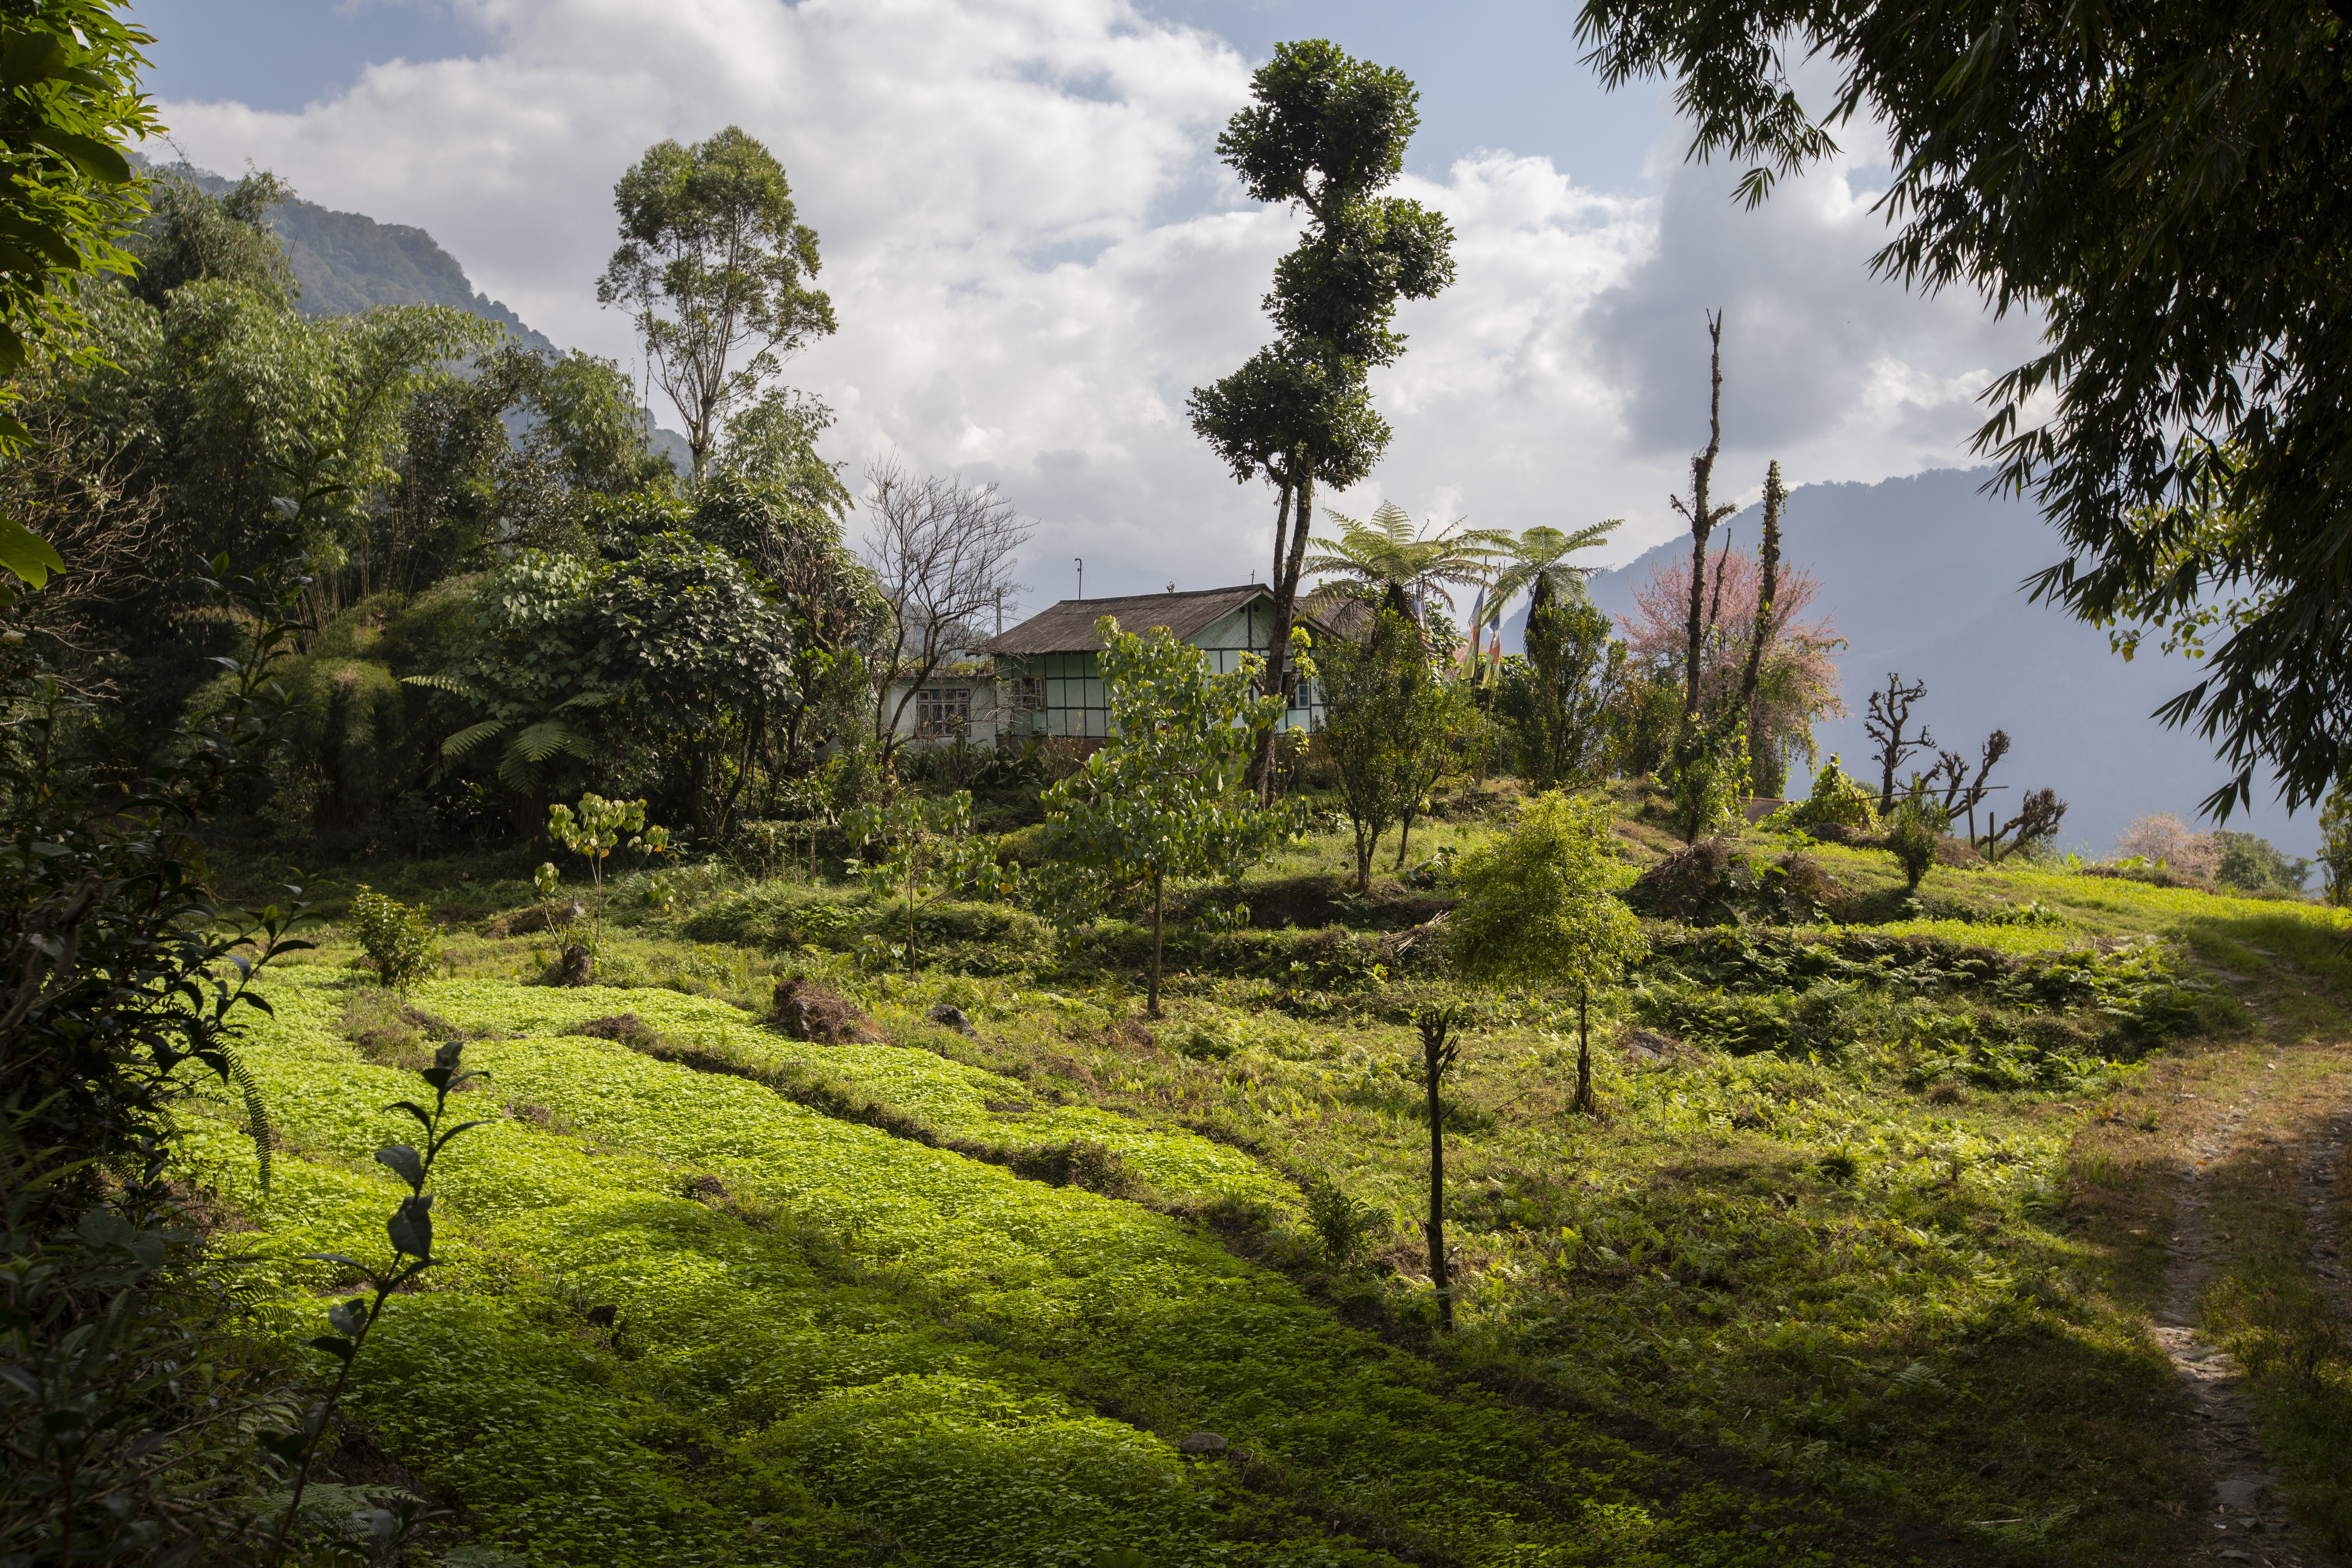 An organic farm in the village of Tingvong, Dzongu, in the Indian state of Sikkim. Photo: Matilde Gattoni